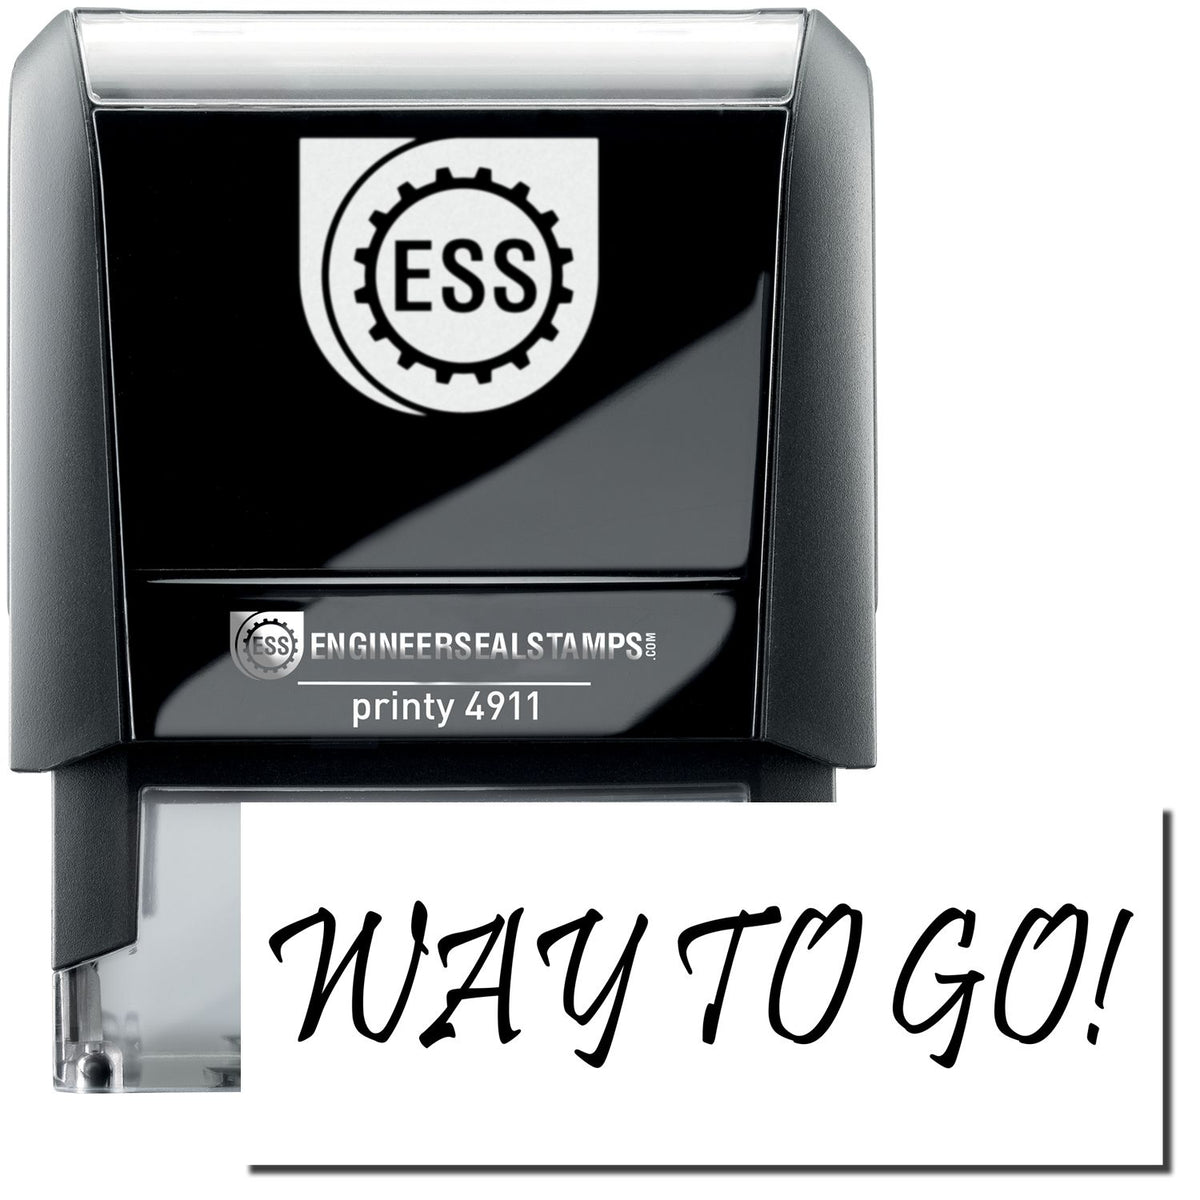 A self-inking stamp with a stamped image showing how the text &quot;WAY TO GO!&quot; is displayed after stamping.